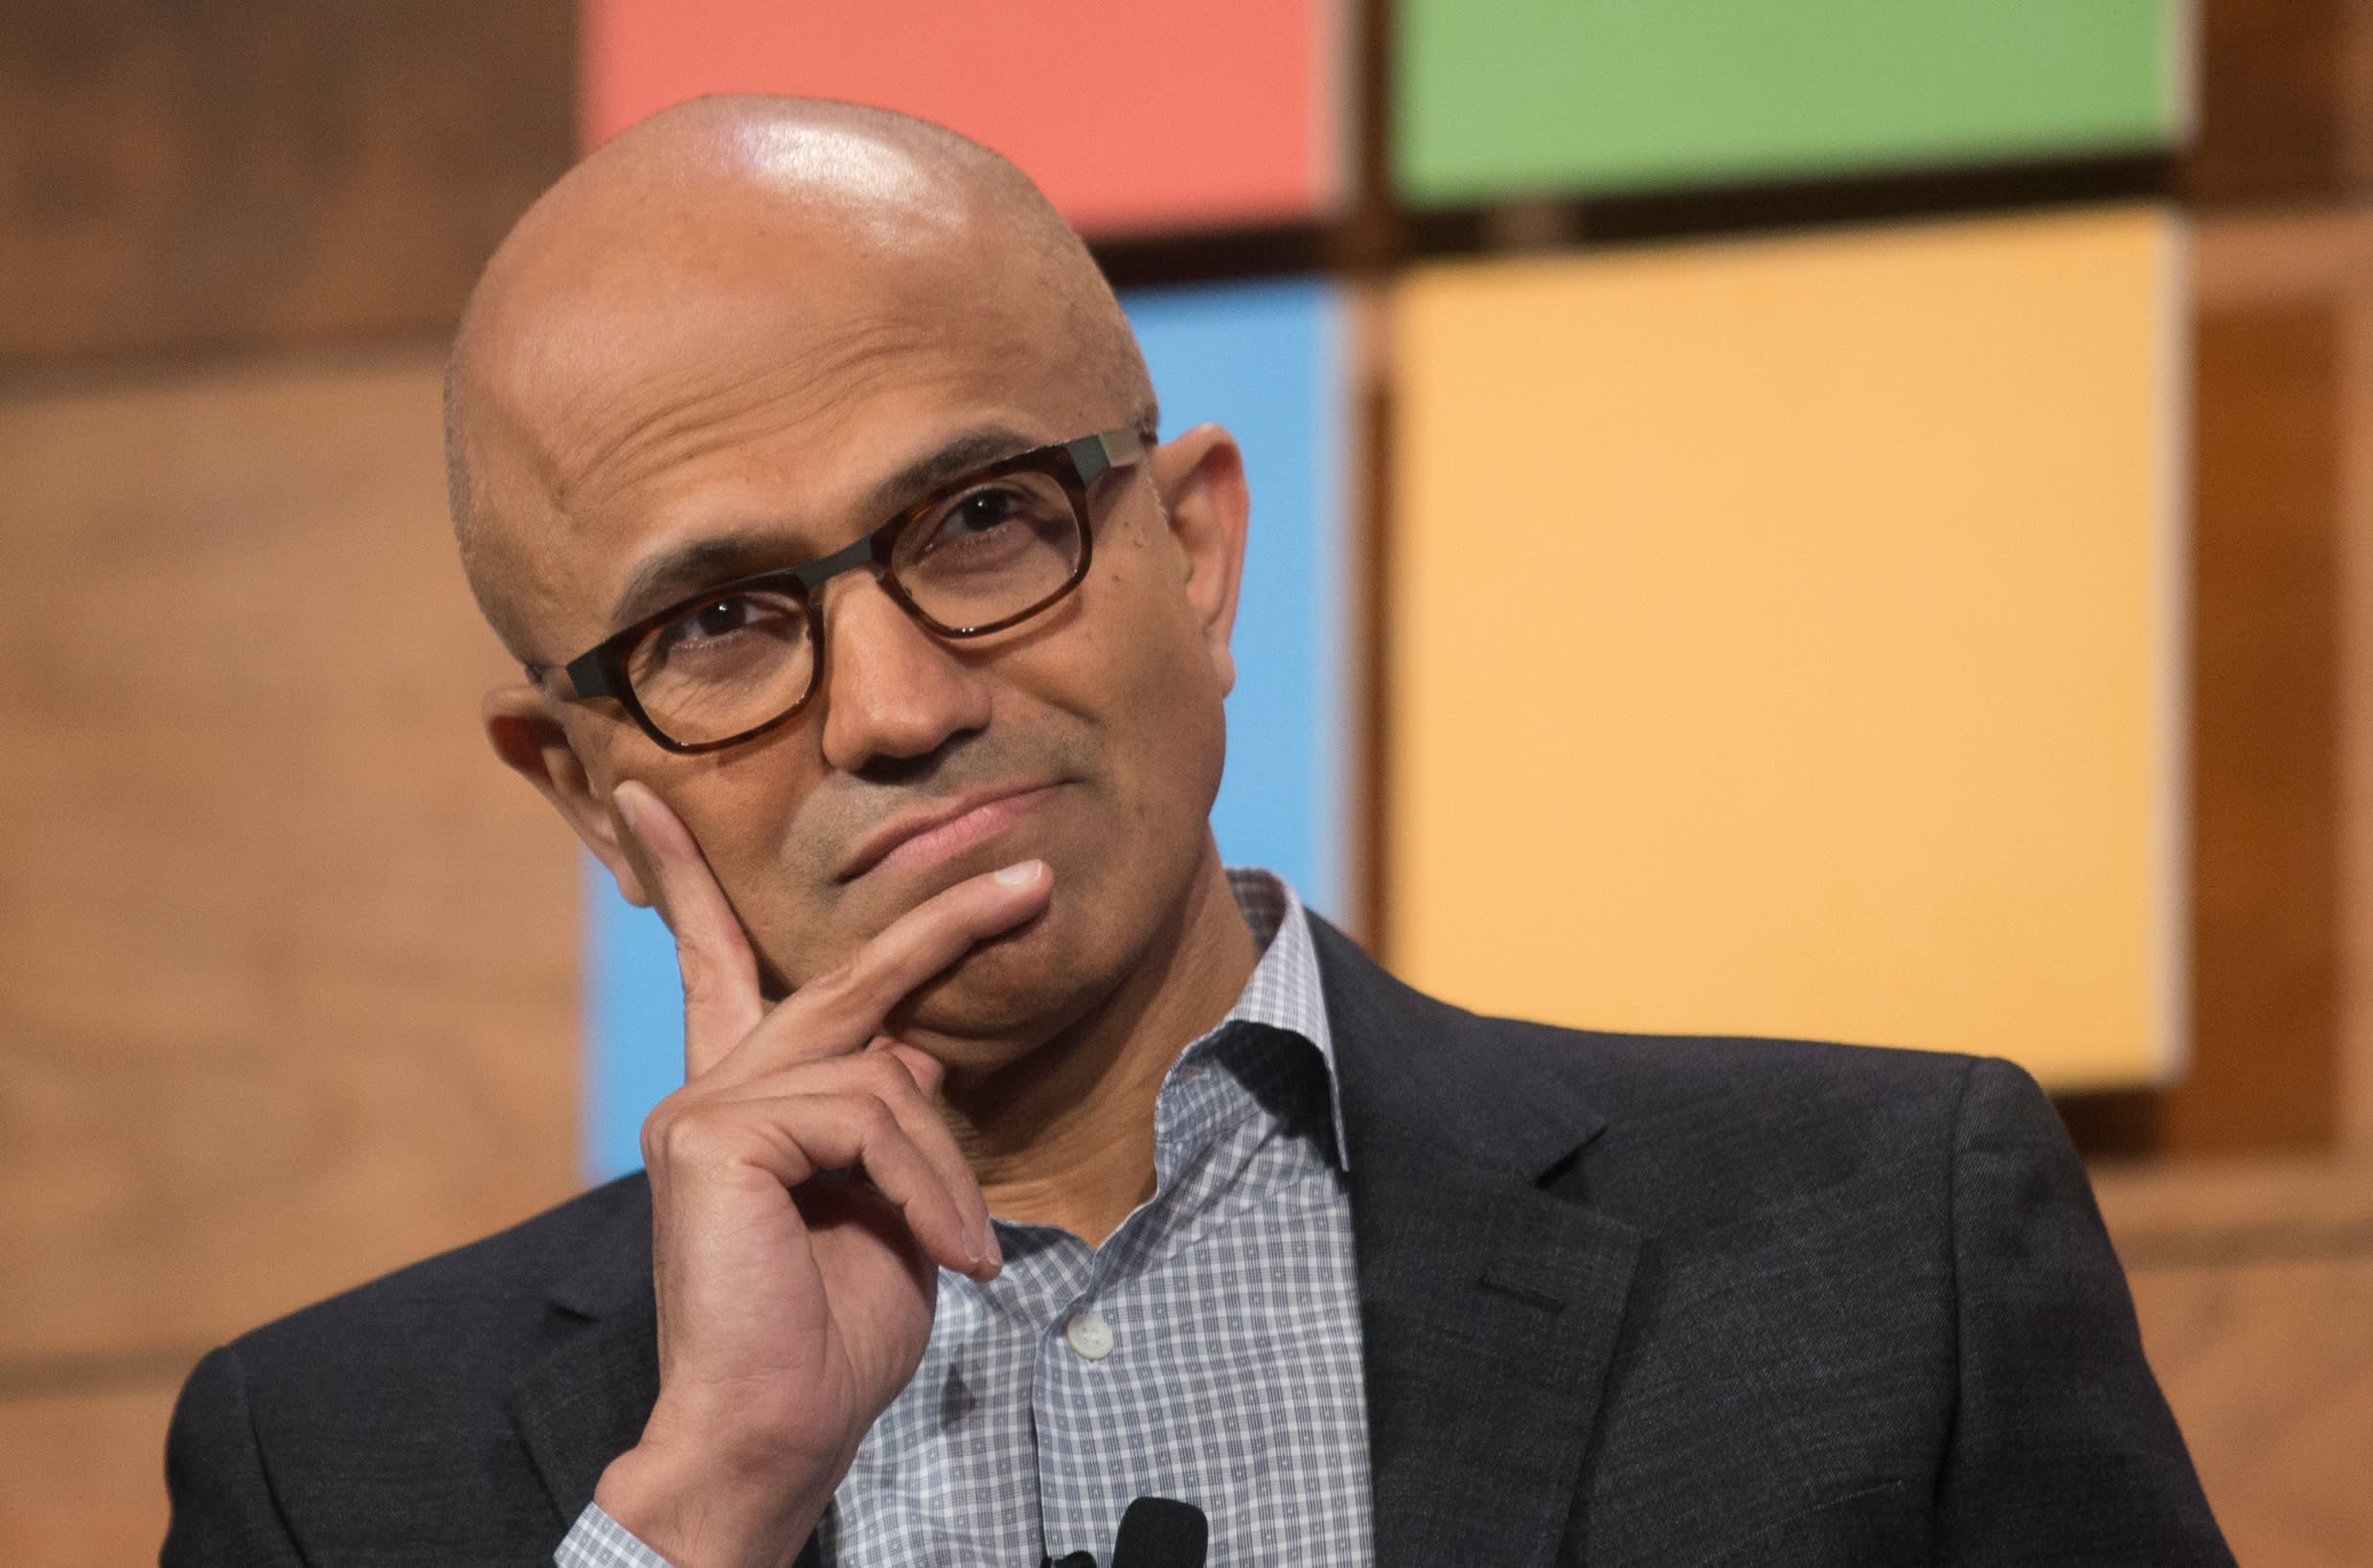 Microsoft hires a law firm to review its sexual harassment policies and issue a report in the spring about the investigations, including one involving Gates (Jordan Novet/CNBC)